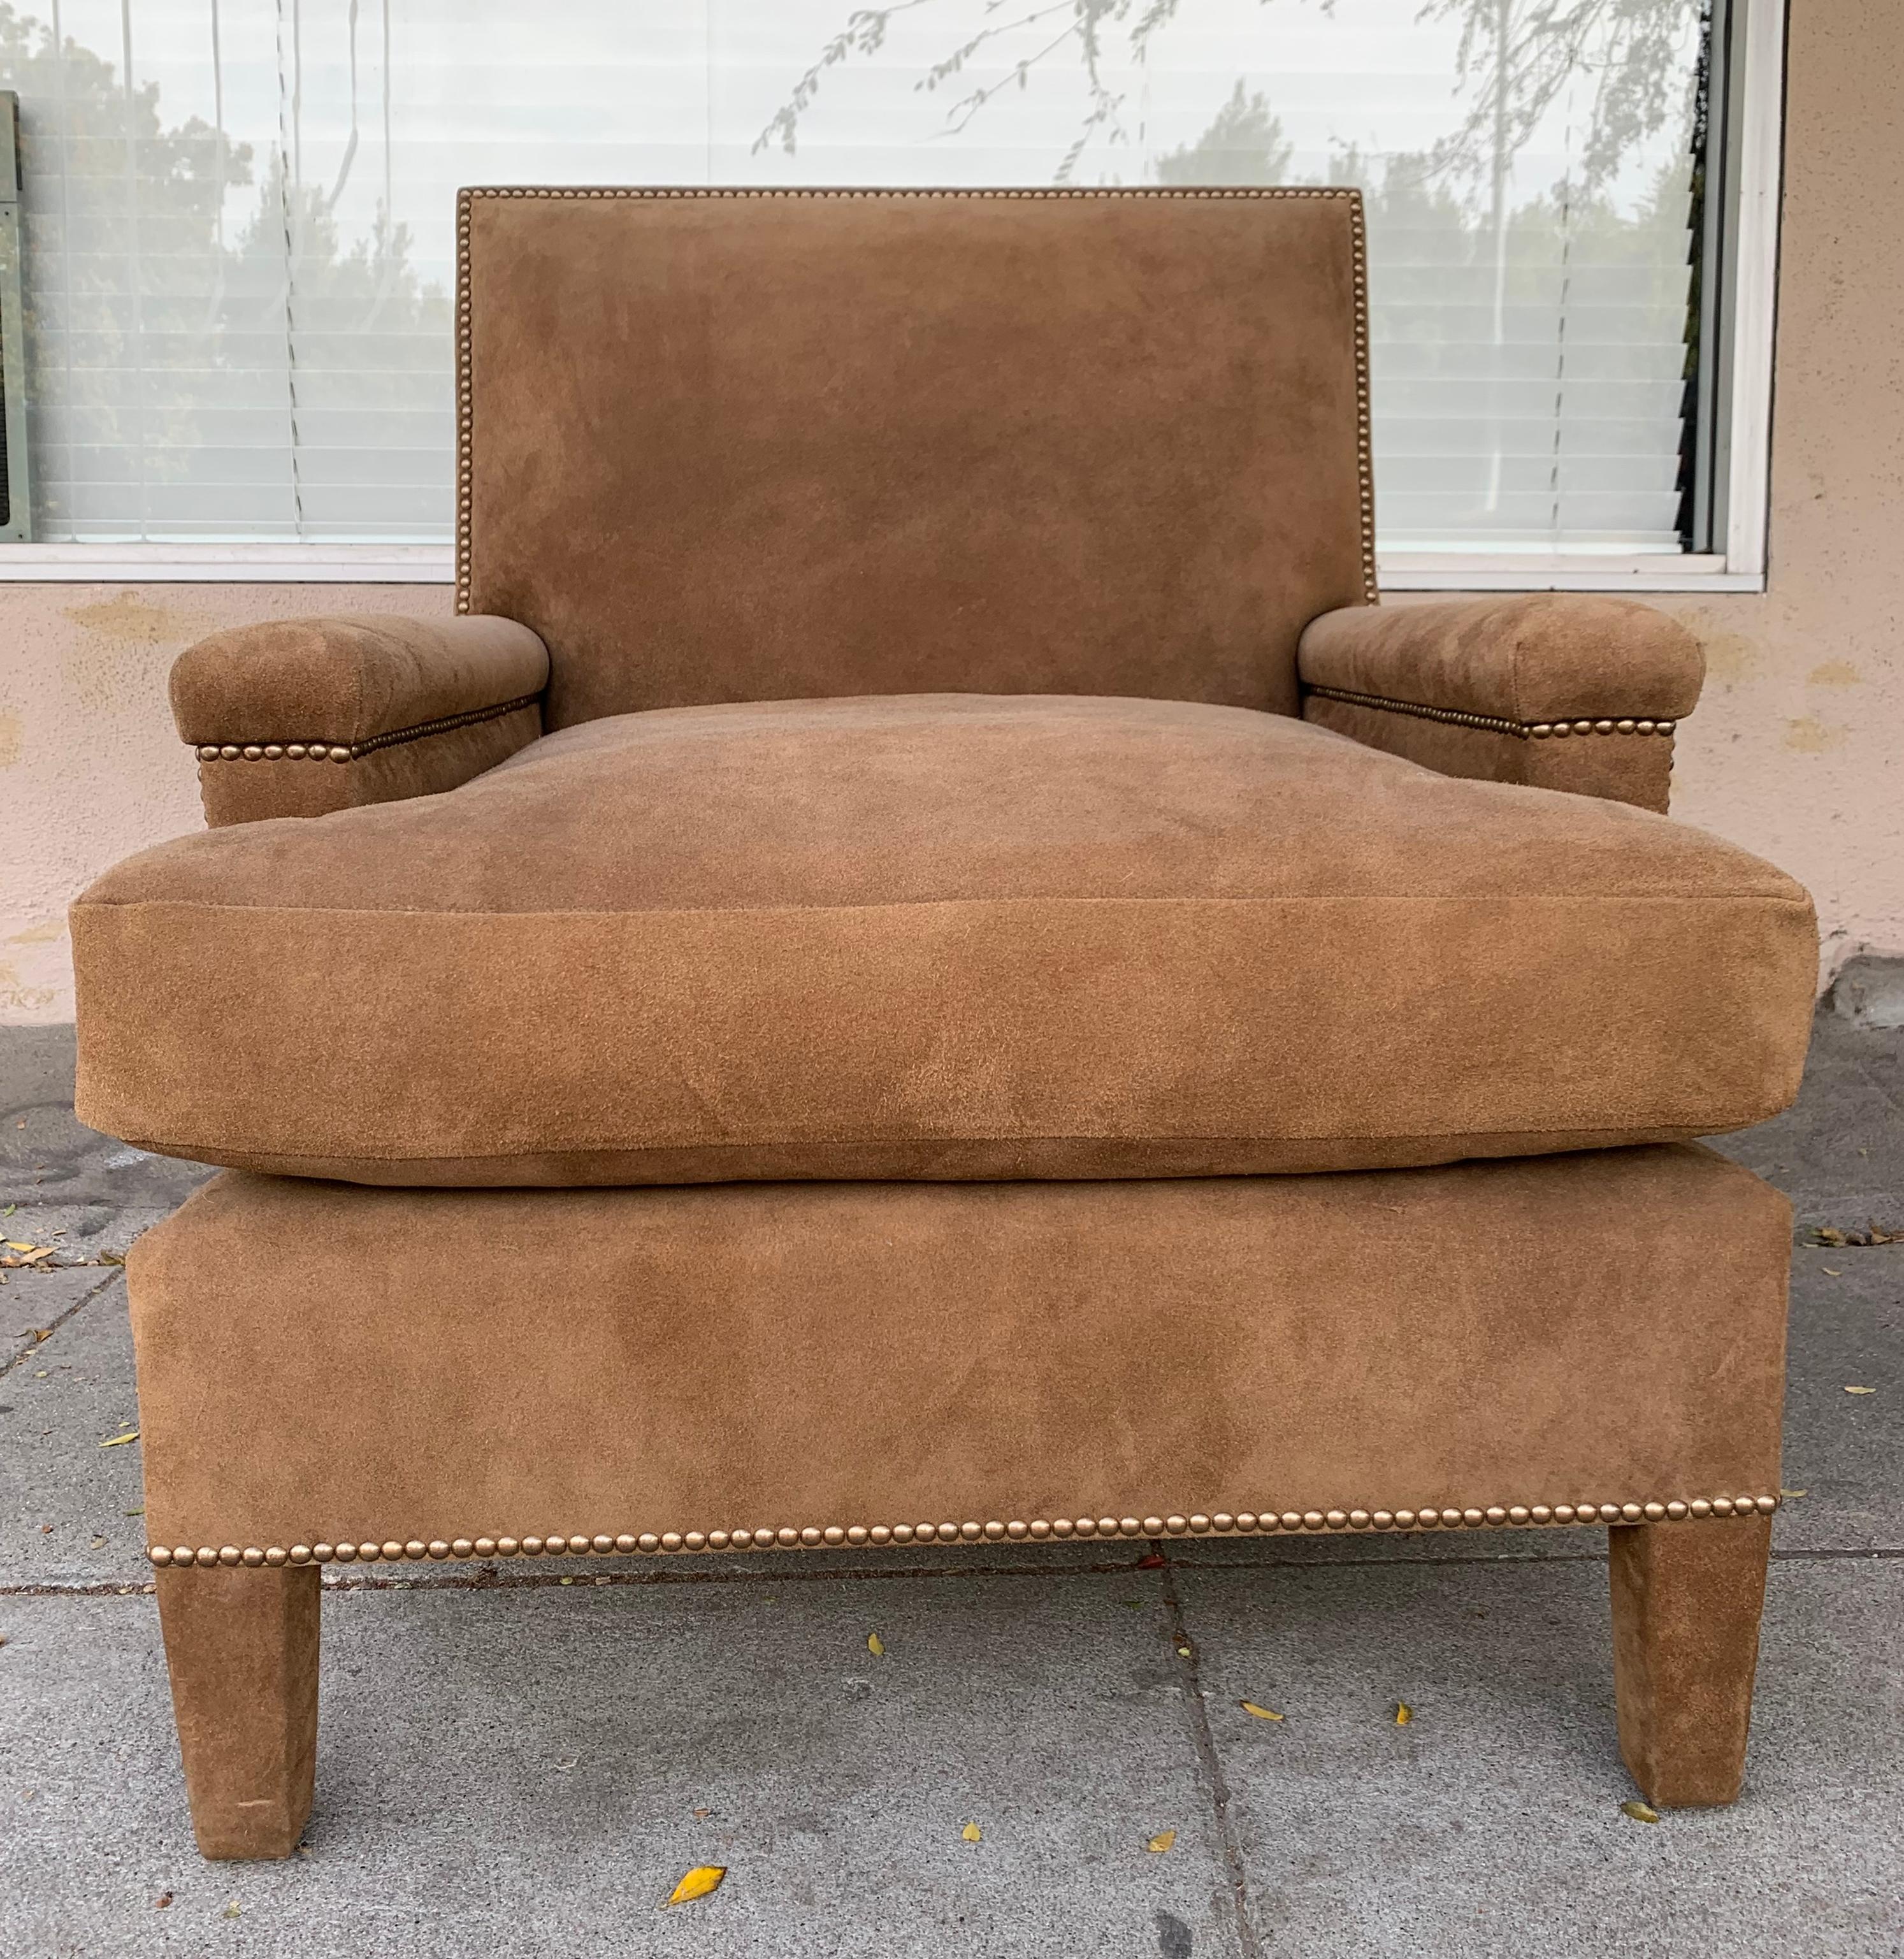 North American Pair of Large Armchairs Upholstered in Brown Suede